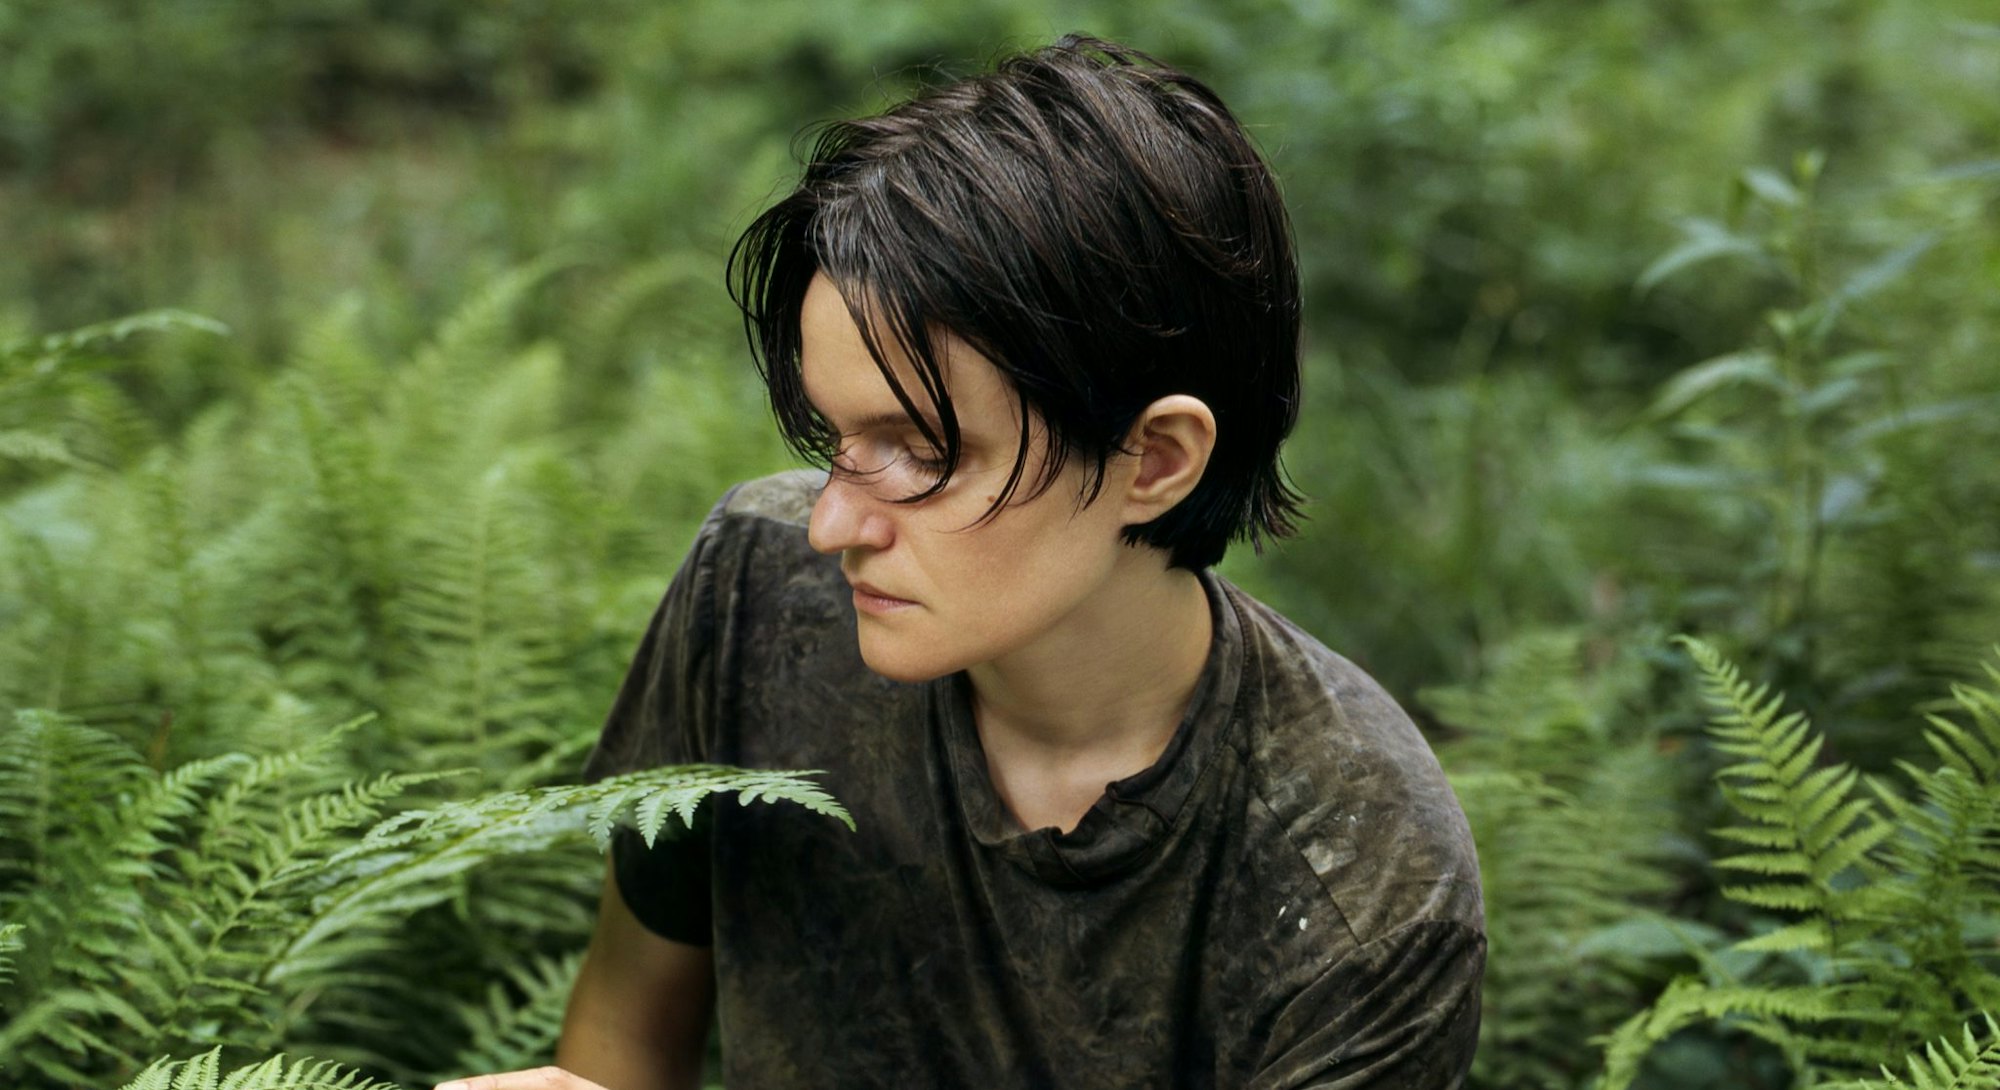 Singer-songwriter Adrianne Lenker sits among fern on the forest floor, gently touching the tip of a ...